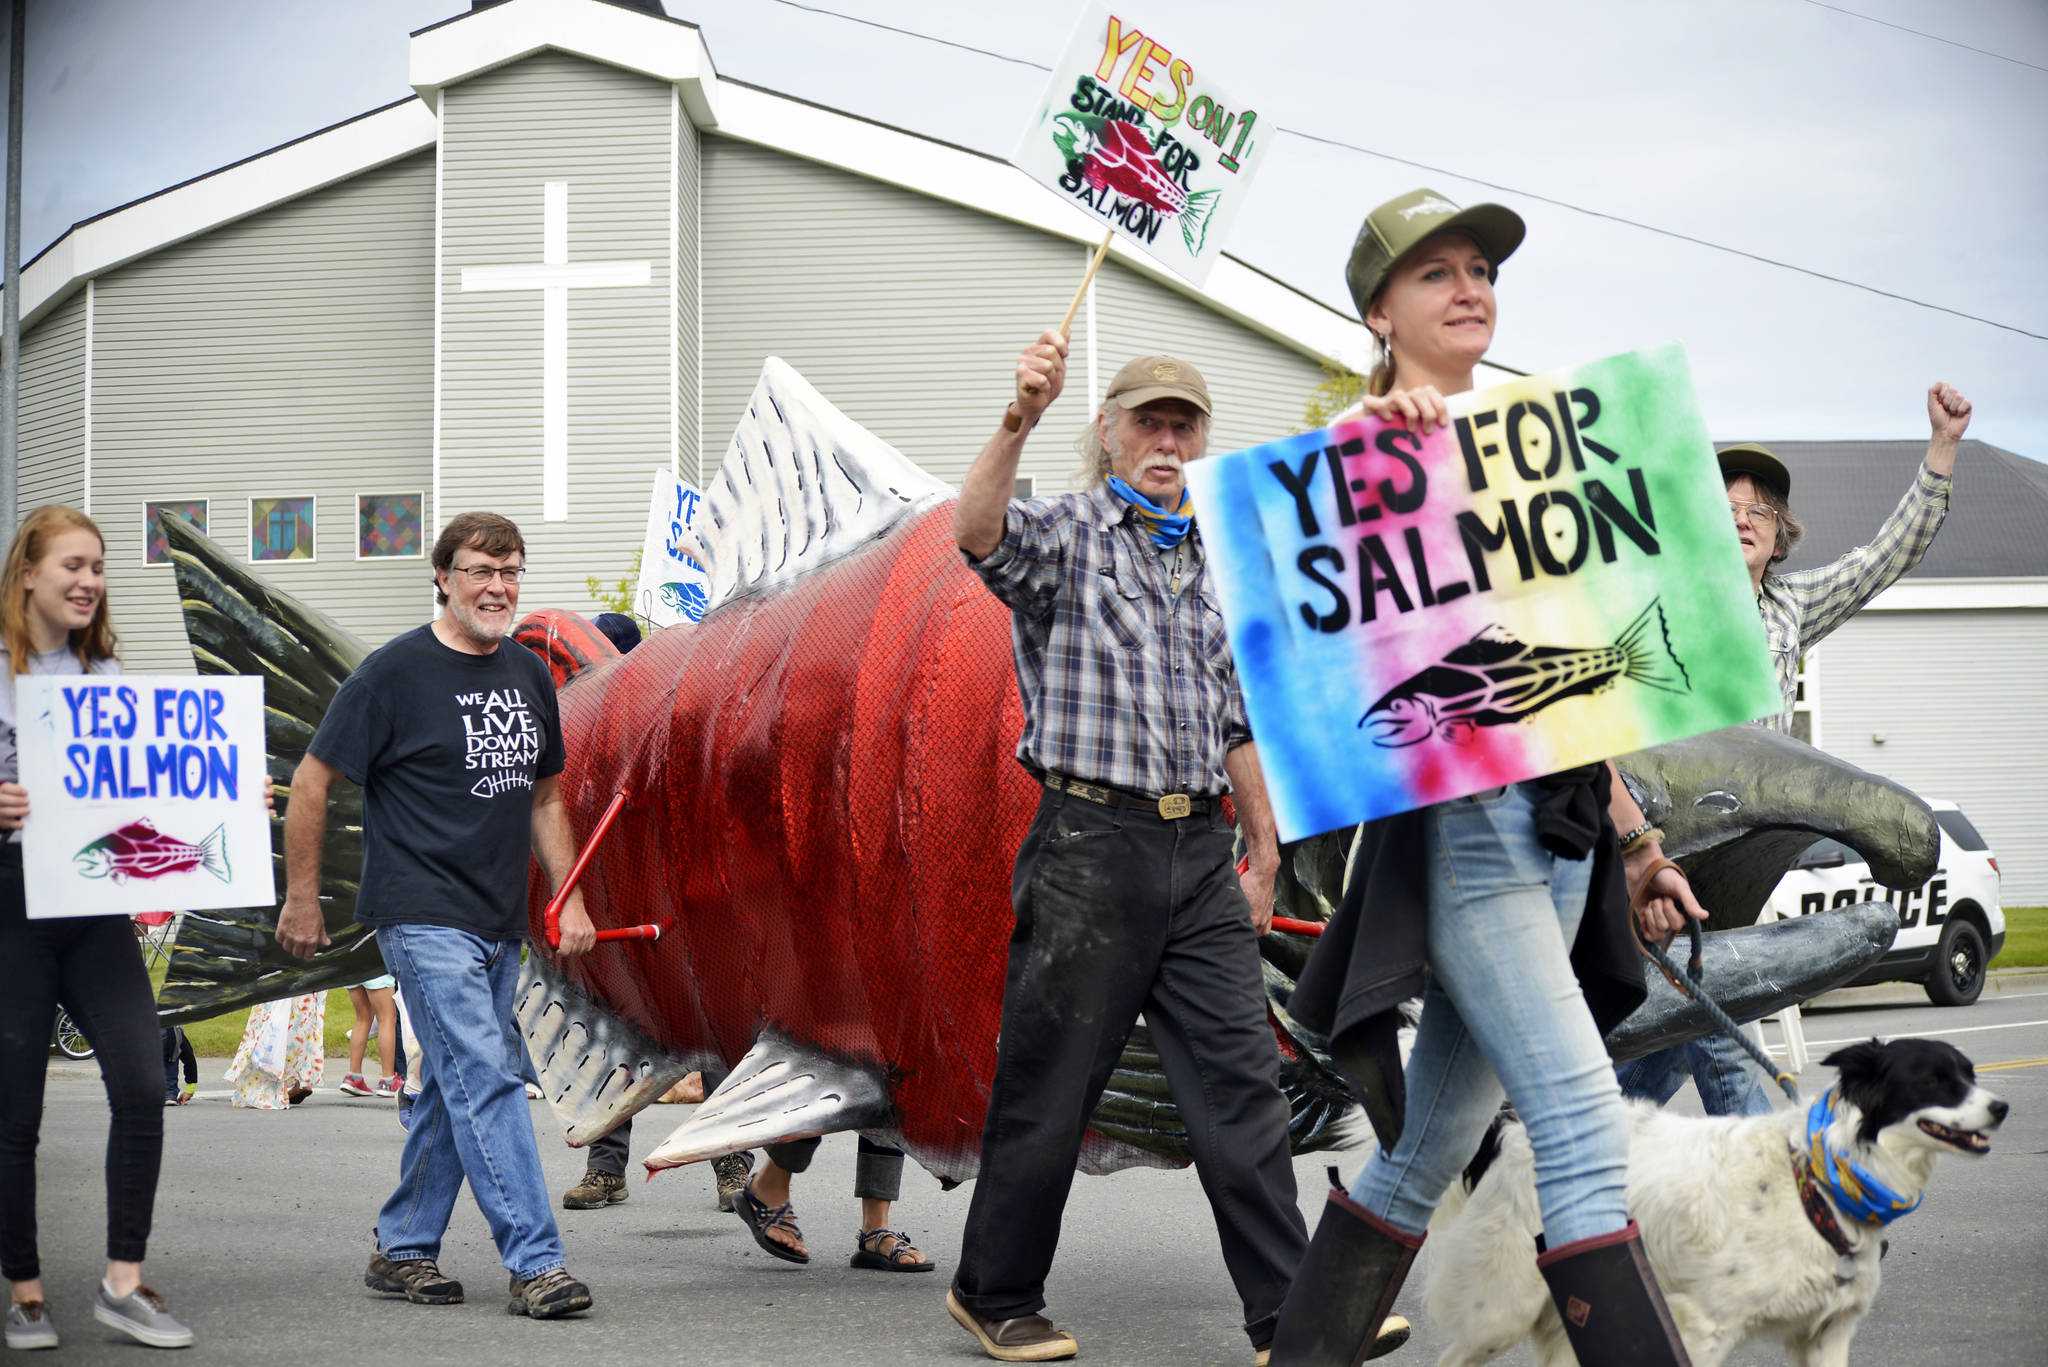 Supporters of the proposed Ballot Measure 1 — commonly known as the Stand for Salmon initiative — march in the Soldotna Progress Days Parade on Saturday, July 28, 2018 in Soldotna Alaska. Some of the initiative, which would tighten the Alaska Department of Fish and Game’s permitting for construction in potential salmon habitat, will be on the Nov. 6 general election ballot after the Alaska Supreme Court issued a decision Wednesday ruling that parts of the original initiative would make unconstitutional resources appropriations and should be stricken out. (Elizabeth Earl/Peninsula Clarion).